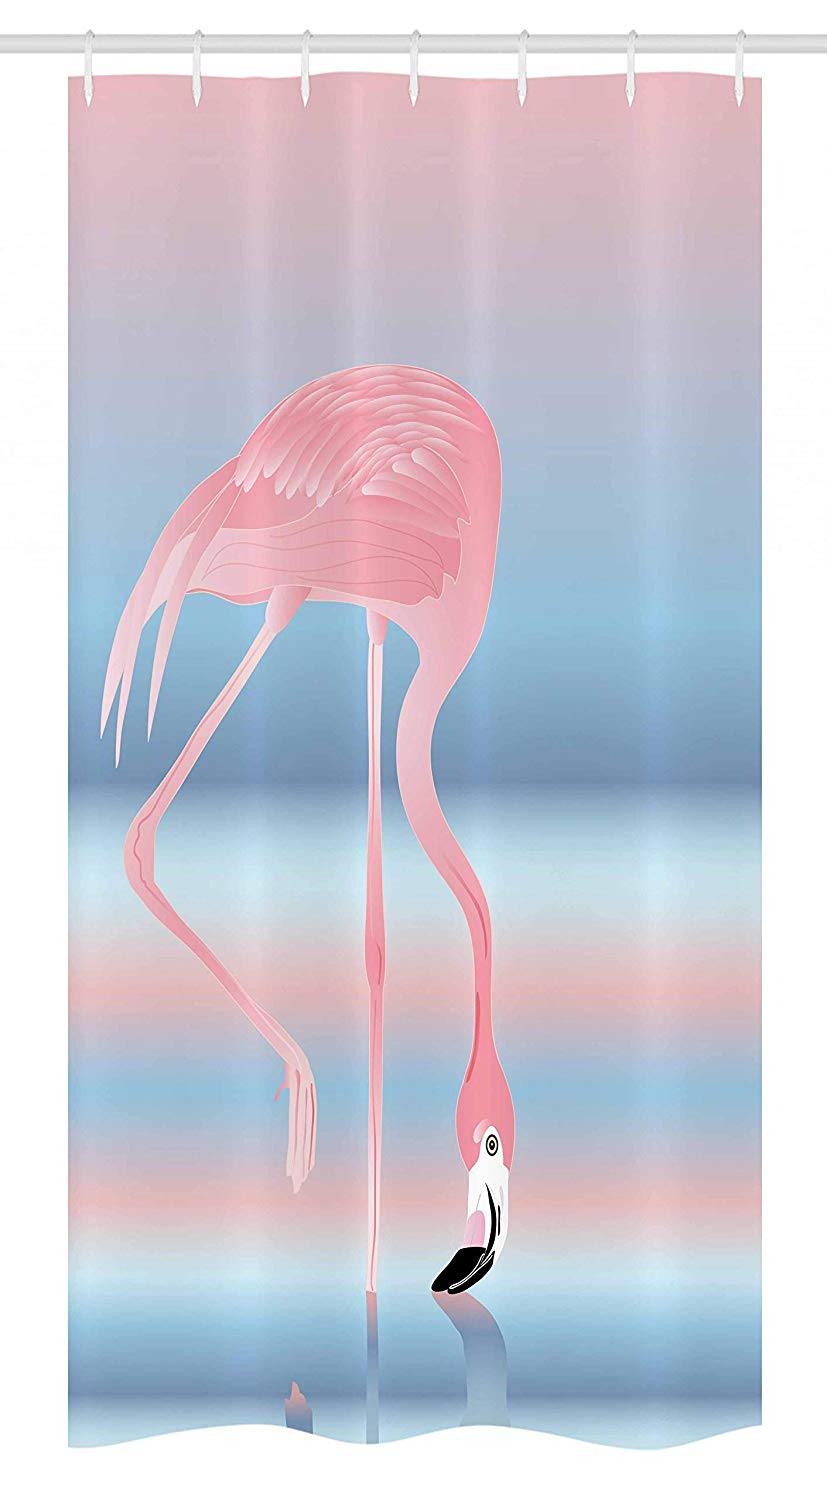 Ambesonne Flamingo Stall Shower Curtain, Illustration of Royal Flamingo in The Lake Soft Pale with Romantic Colors Art Work, Fabric Bathroom Decor Set with Hooks, 36